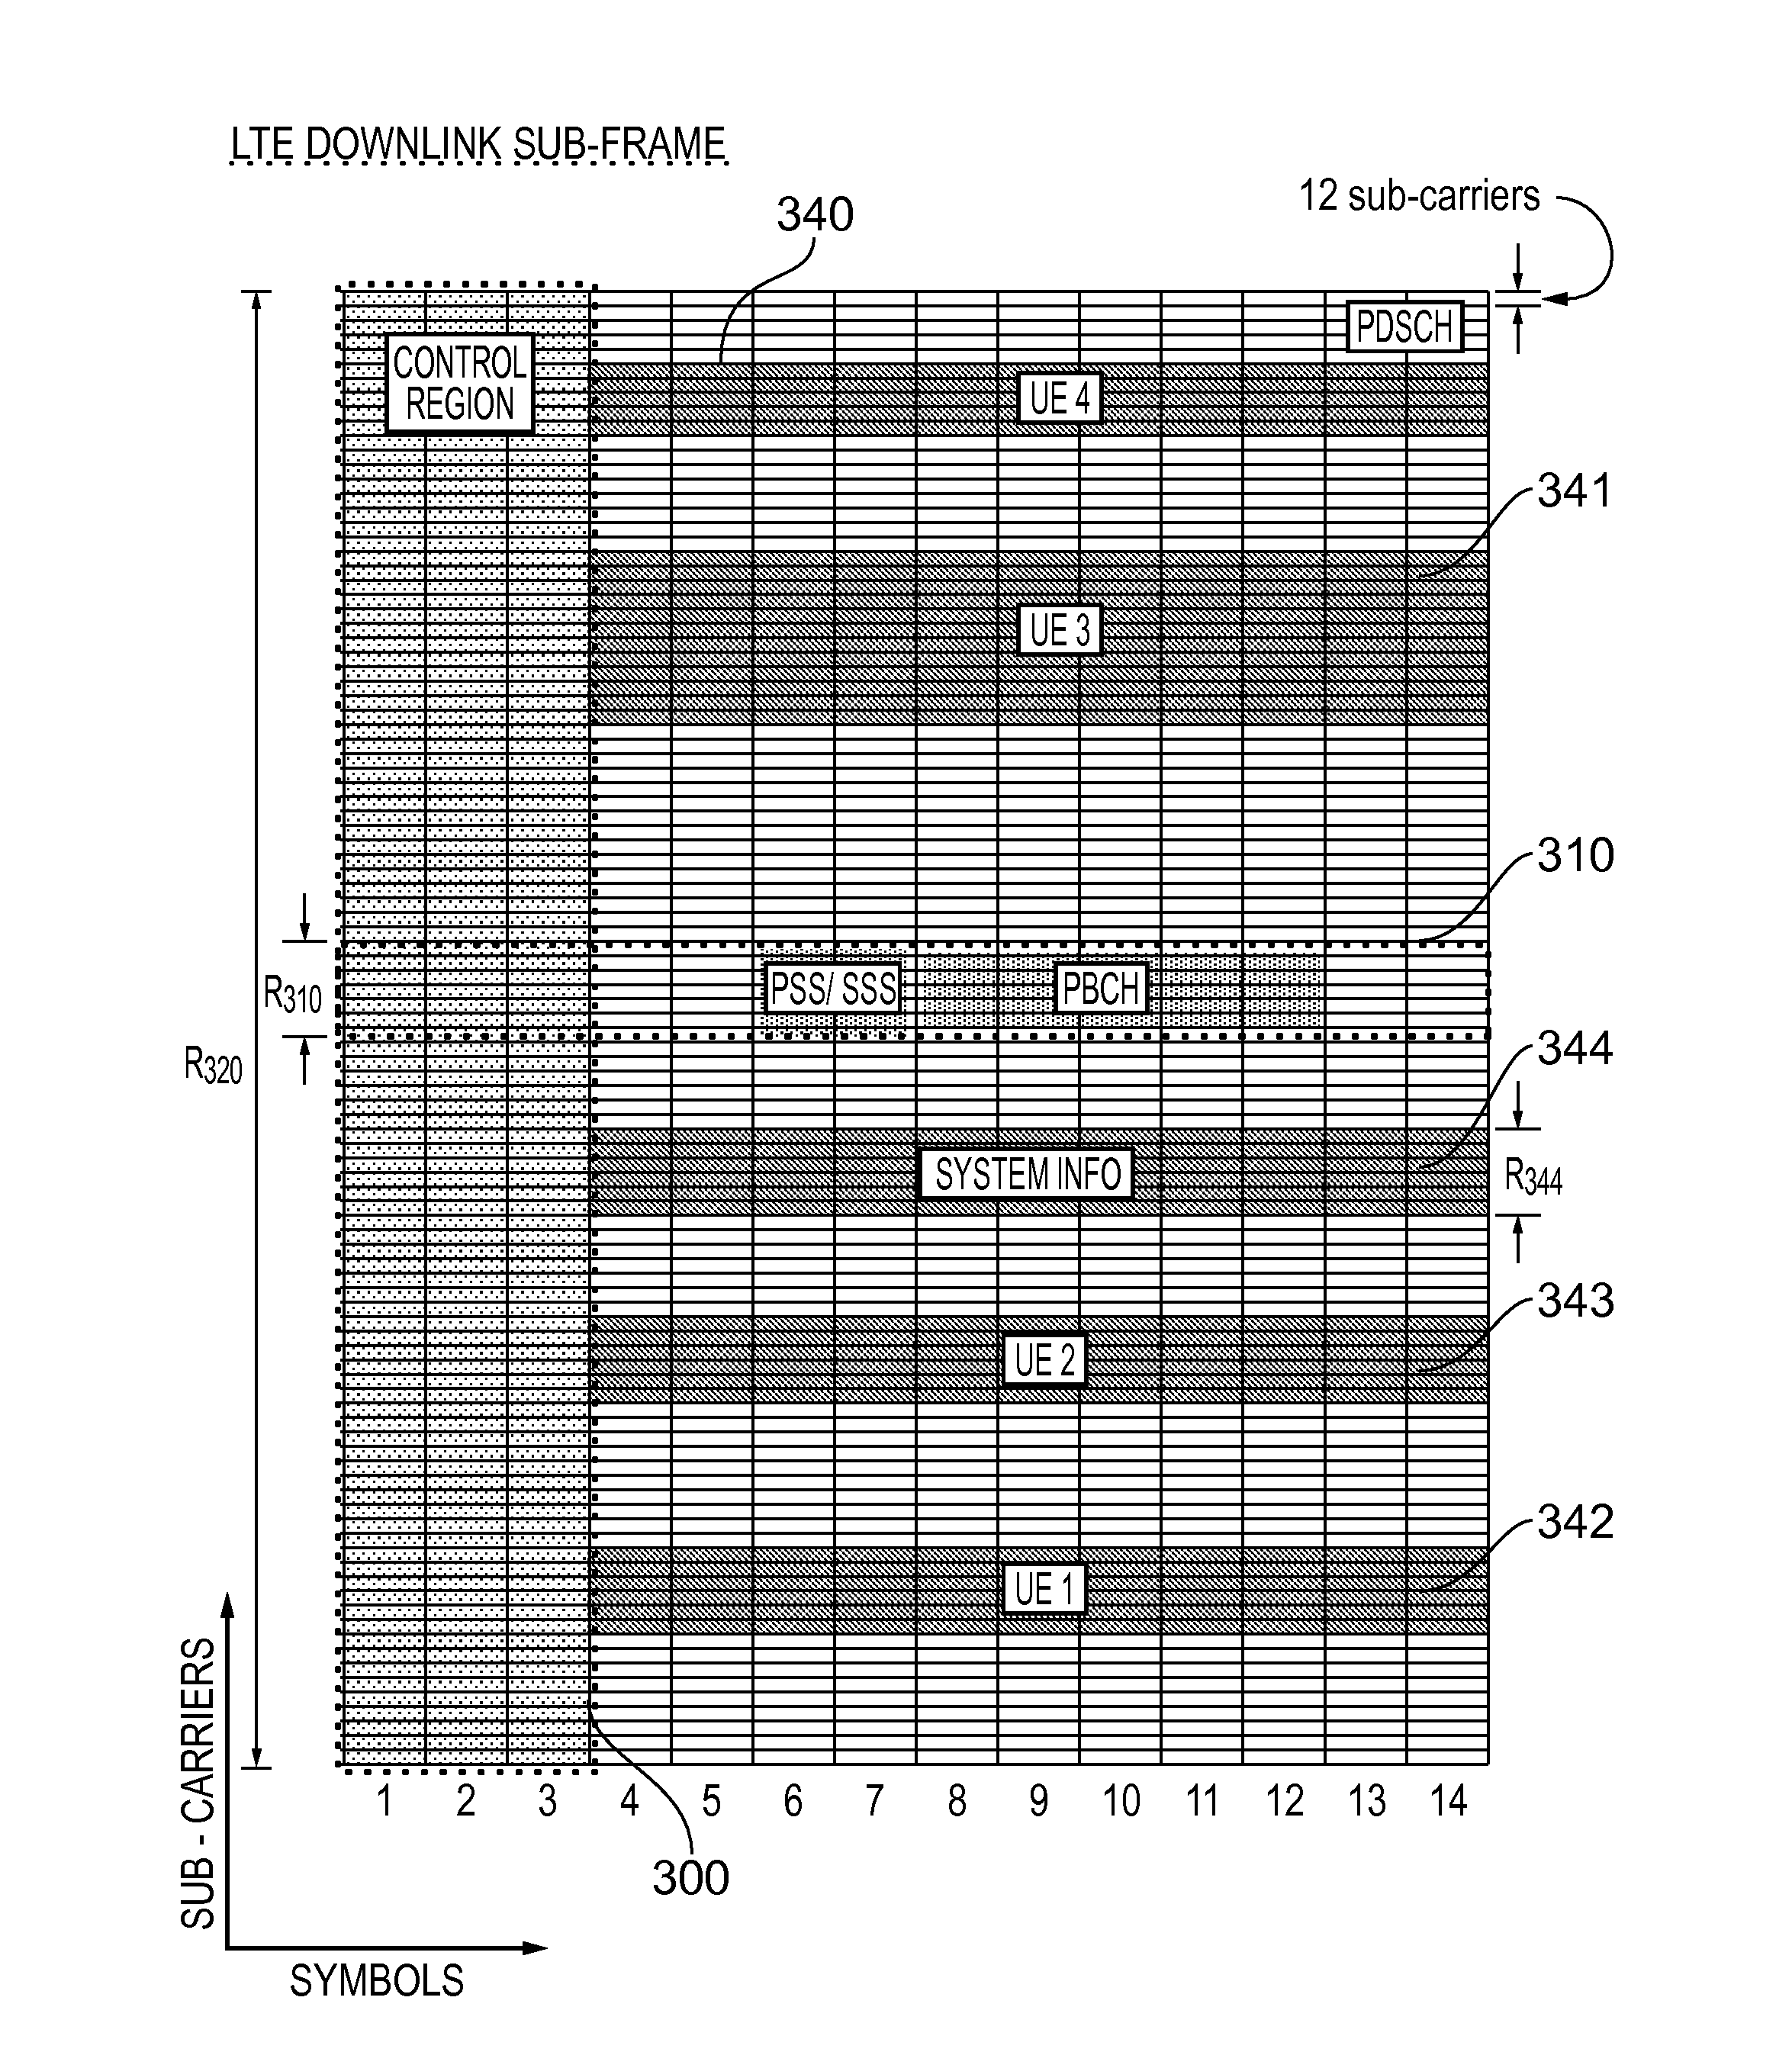 Allocating resources and transmitting data in mobile telecommunication systems comprising machine type communication applications